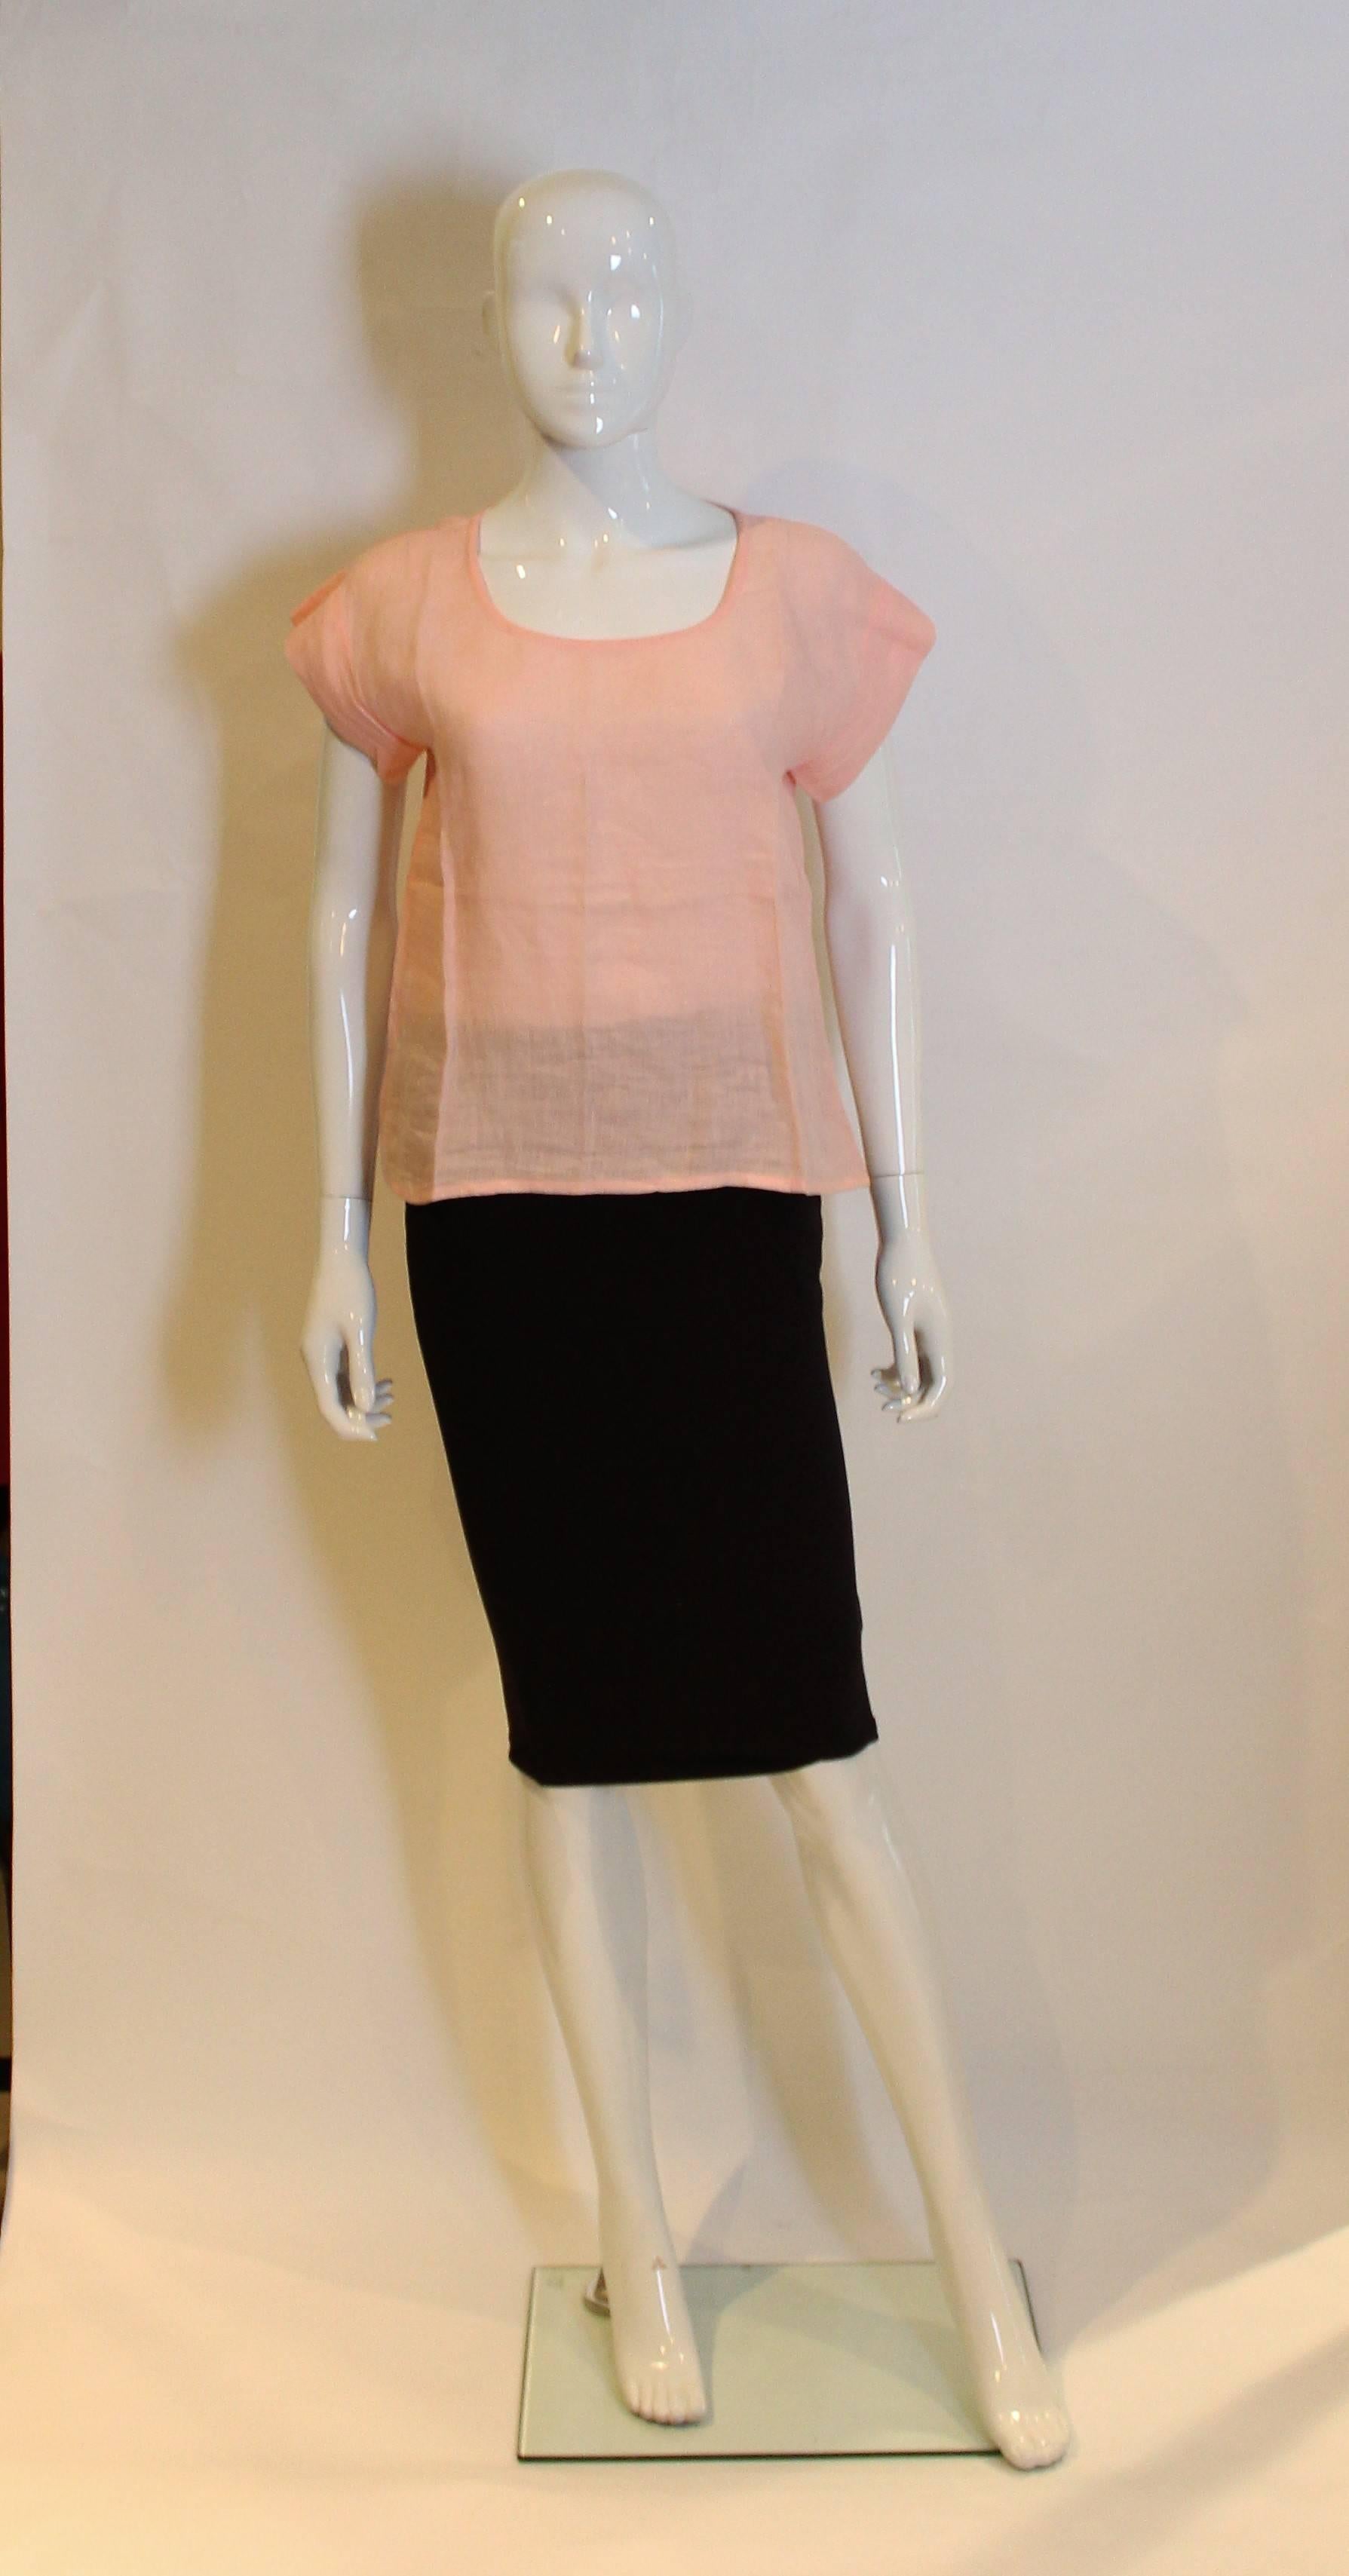 A pretty pink linen top by Yves Saint Laurent Rive Gauche.The top has a deep round neckline, and cap sleeves.